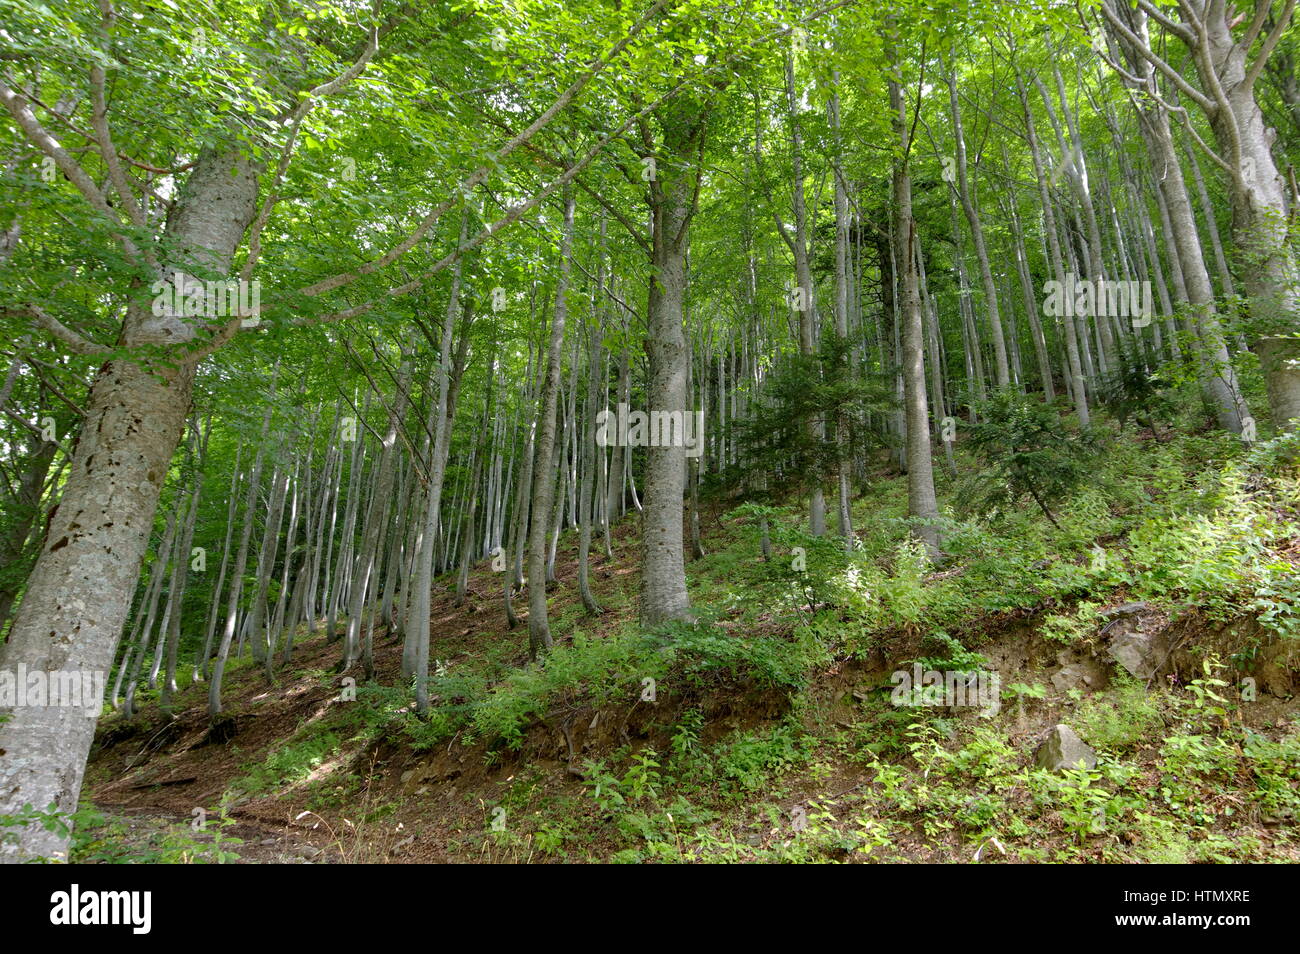 Poplar grove in the underbrush with sun getting through the trees - Woods of Abetone, Pistoia, Tuscany, Italy, Europe - Craggy slopes series Stock Photo